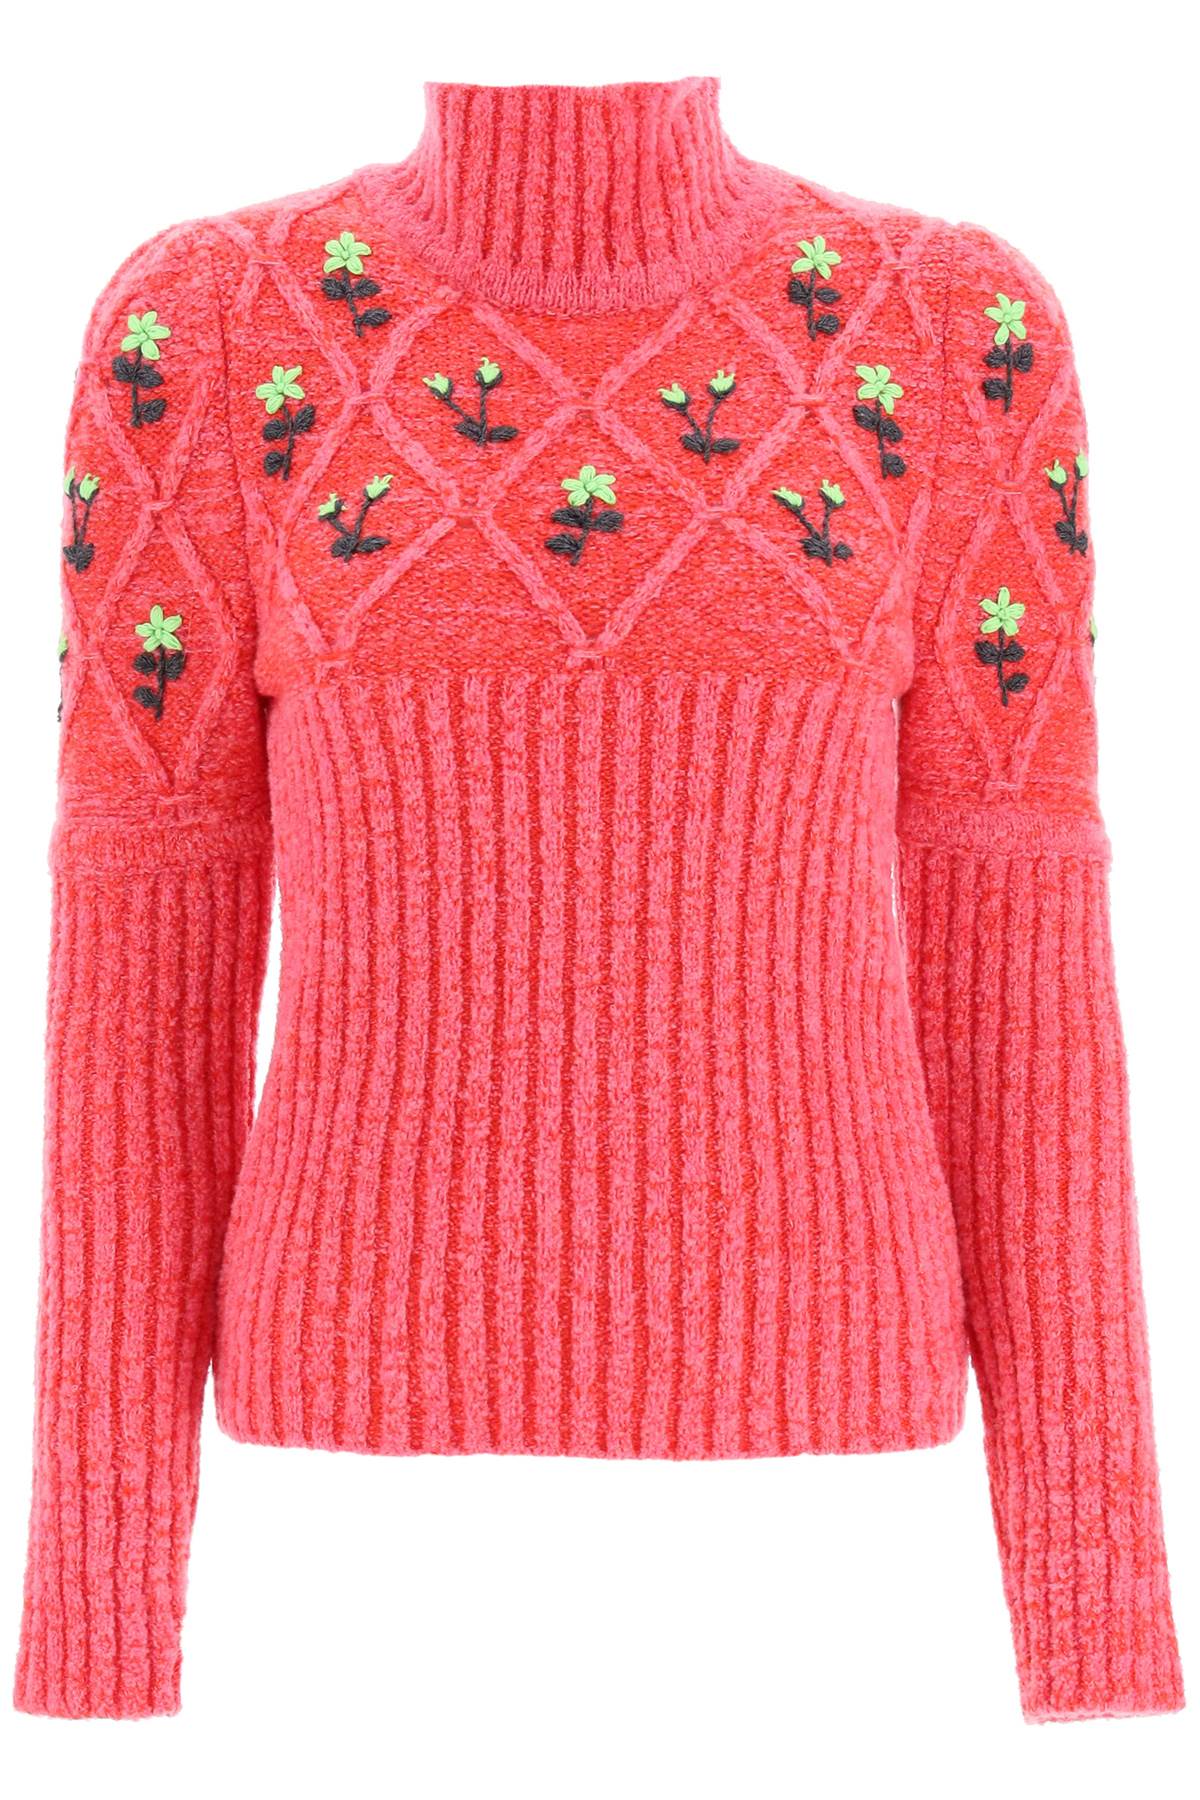 Cormio oma Sweater With Handmade Embroidery